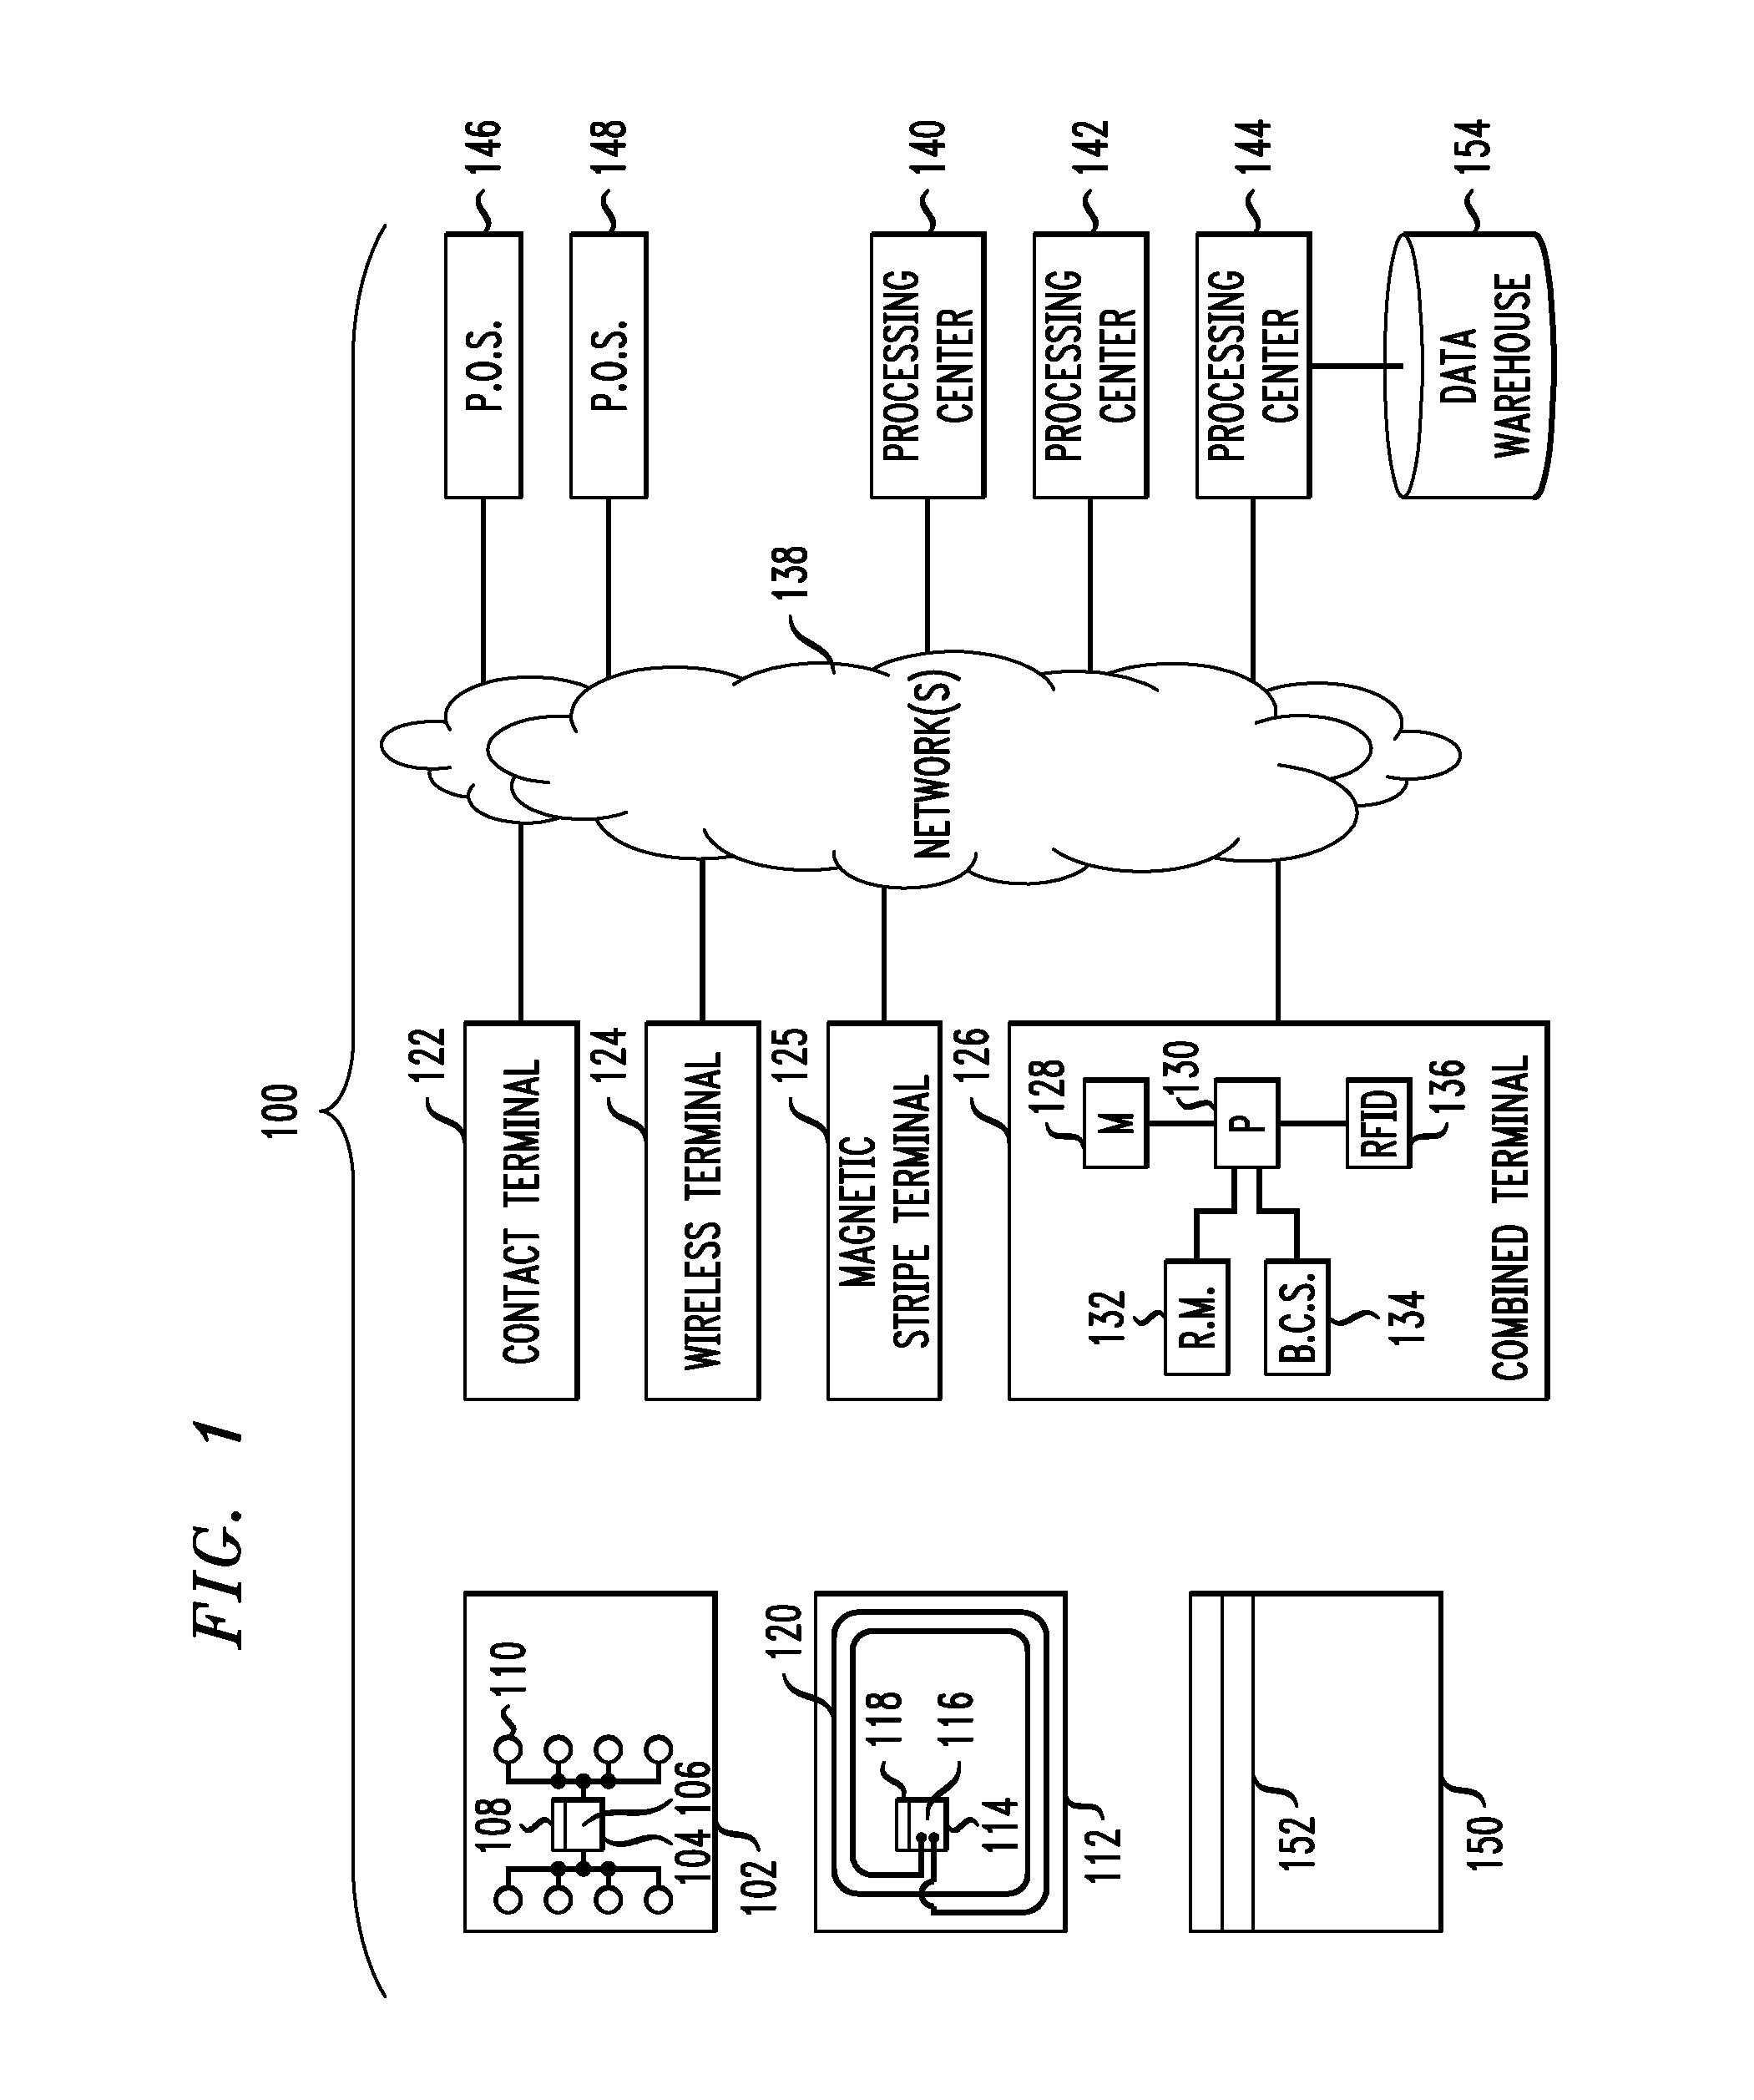 Apparatus, method, and computer program product for rewarding healthy behaviors and/or encouraging appropriate purchases with a reward card